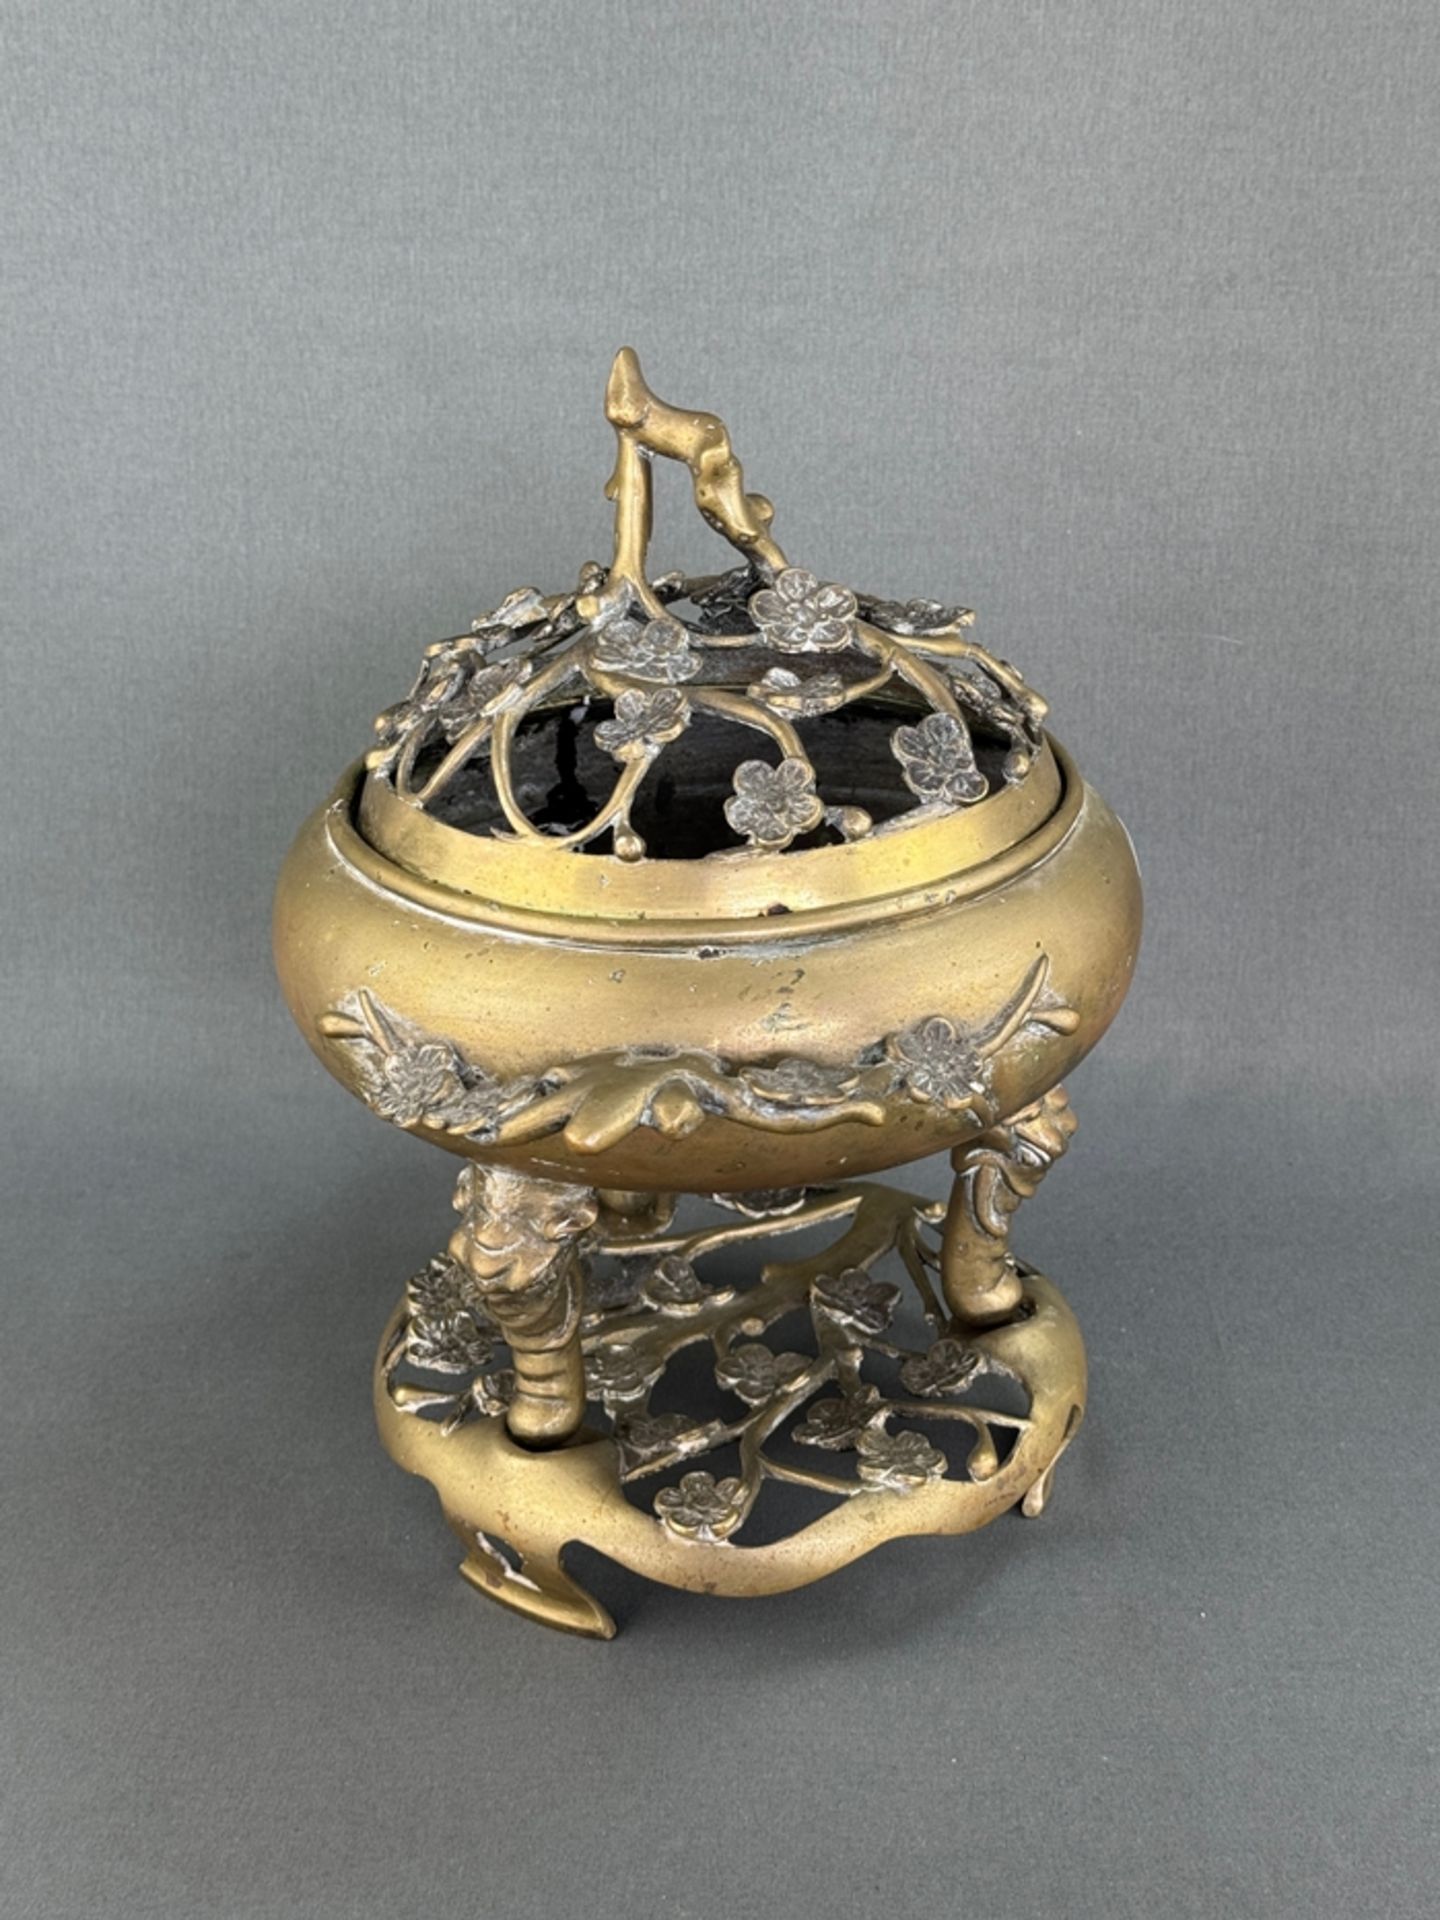 Incense burner, China, brass, decorated with cherry blossom motifs, on stand, height 30cm, diameter - Image 2 of 2